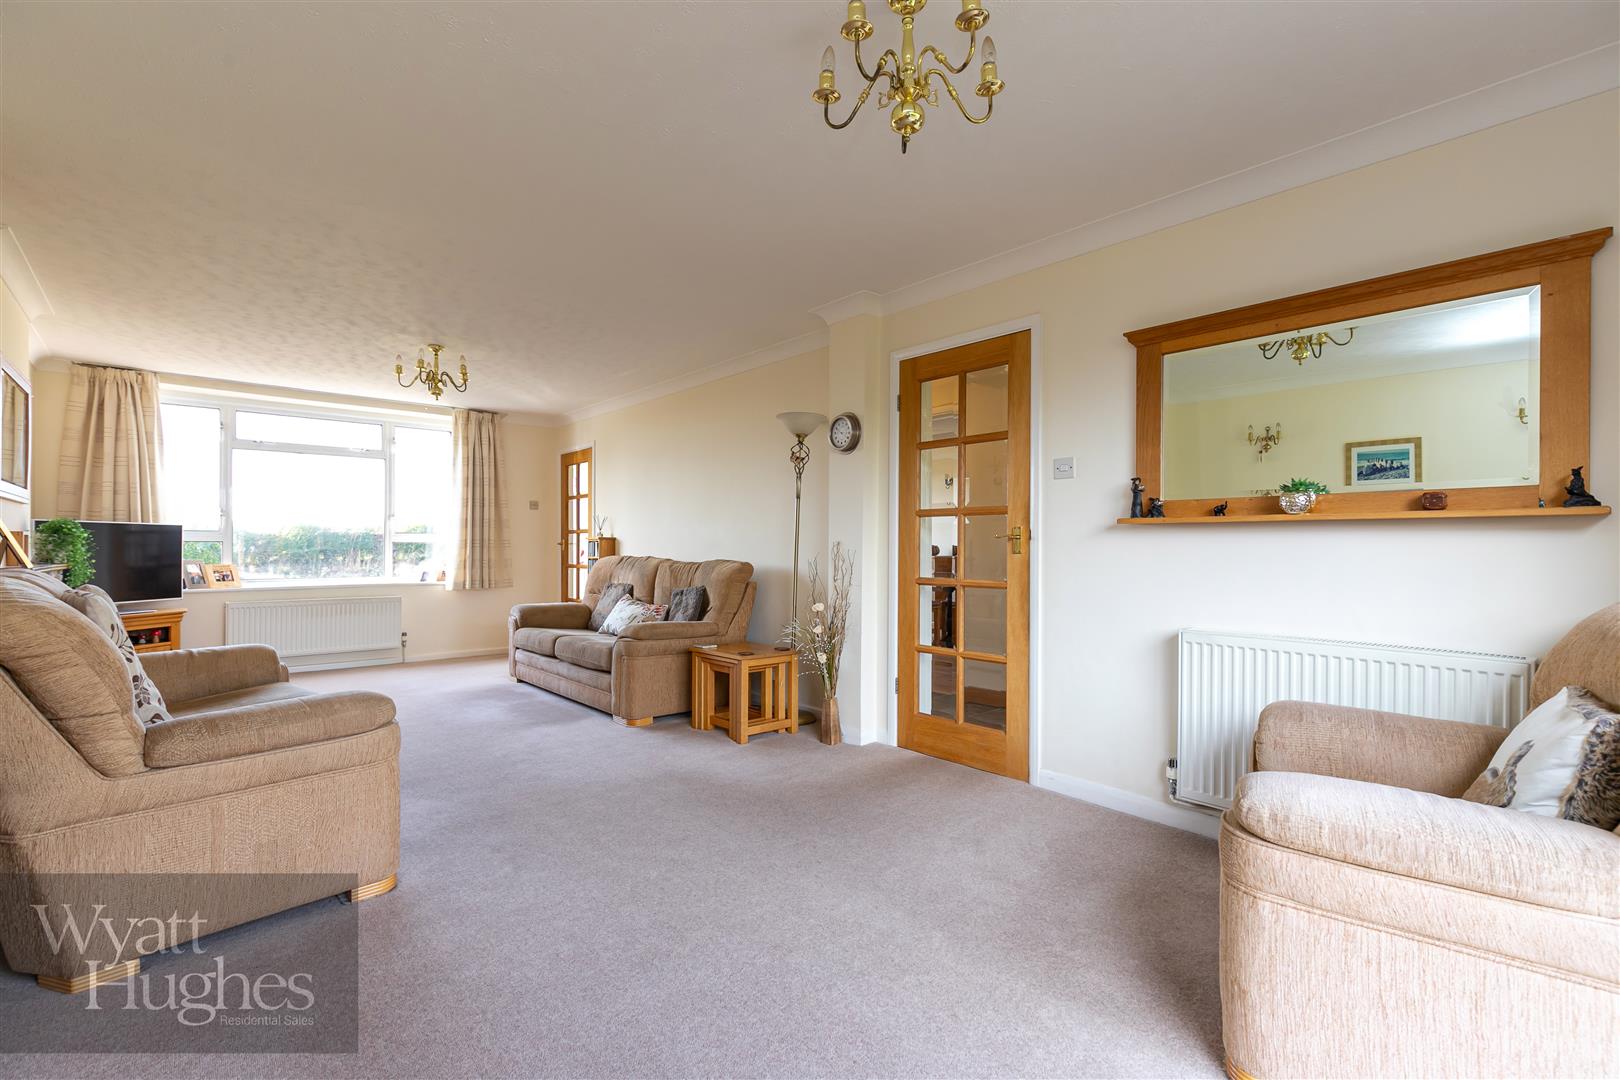 4 bed detached house for sale in Bexhill Road, Ninfield, Battle  - Property Image 13